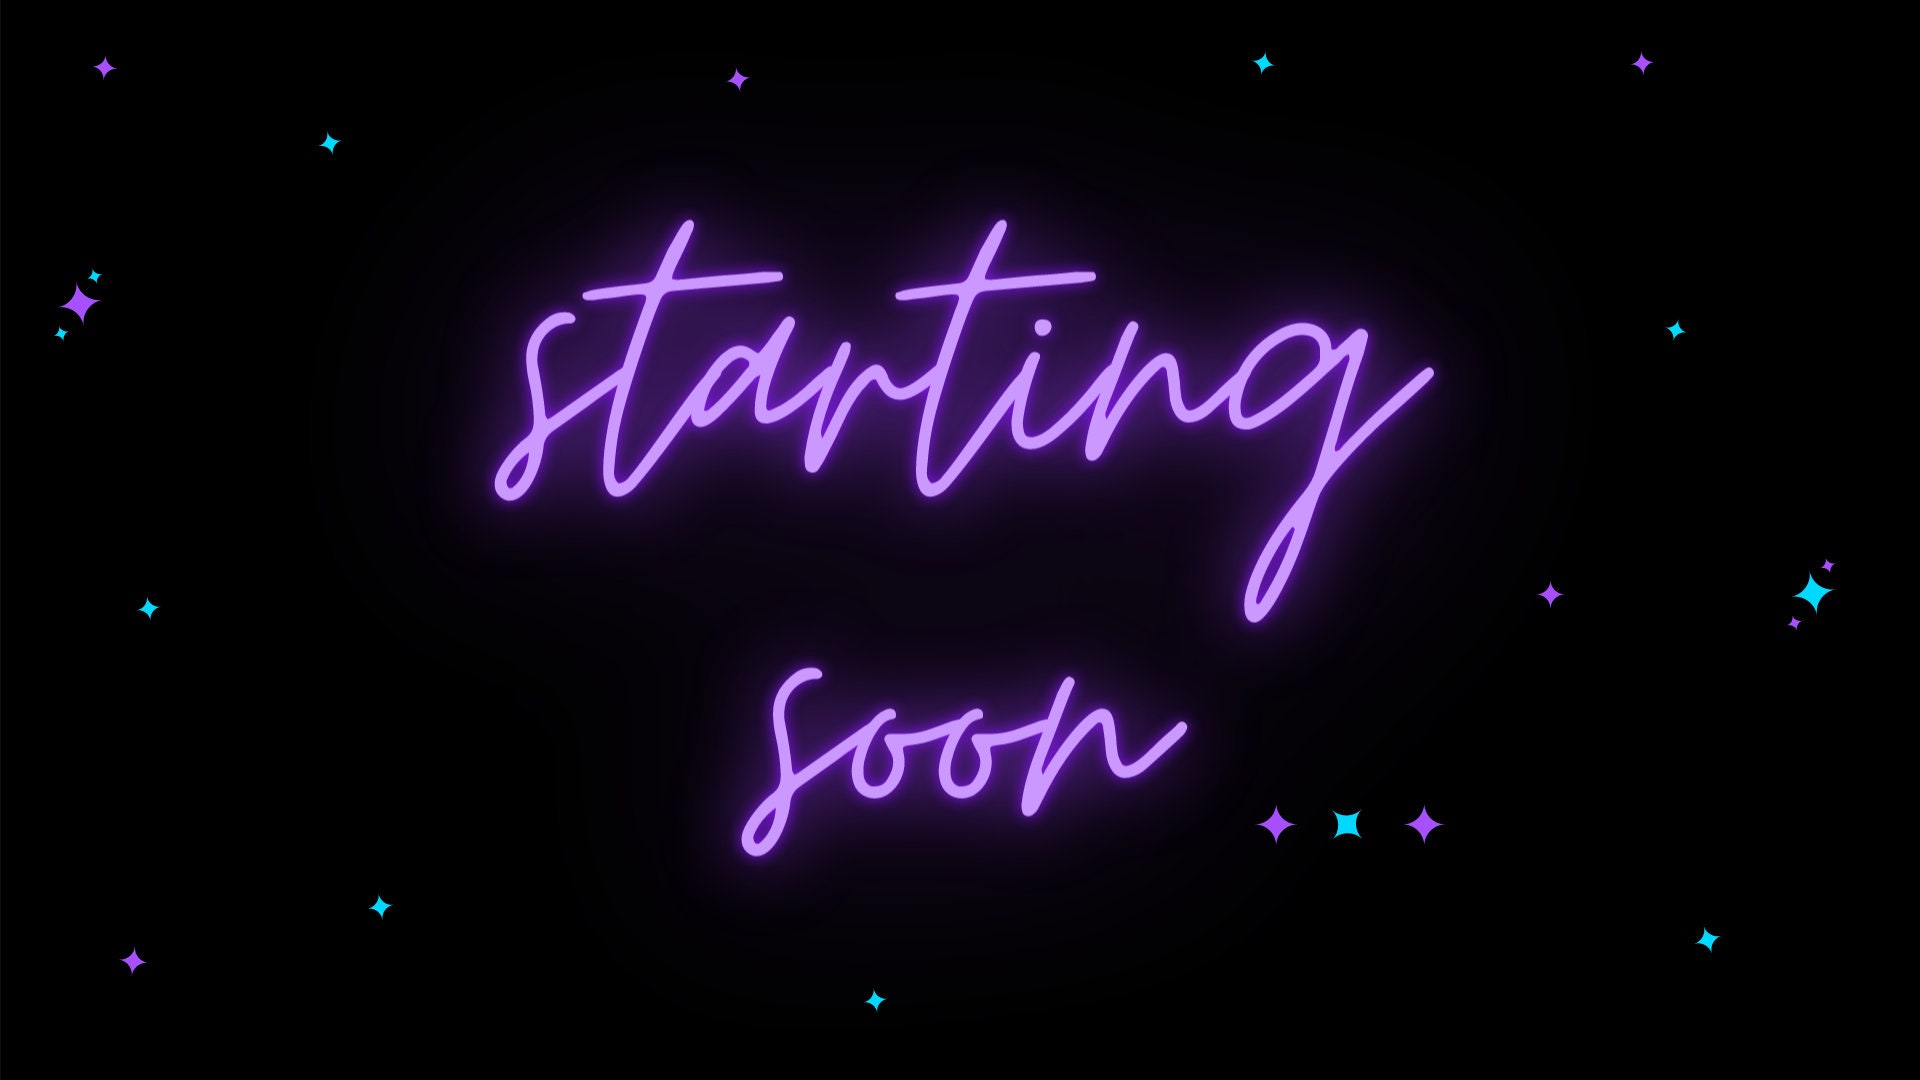 3 neon twitch overlay animated stream starting soon animated | Etsy